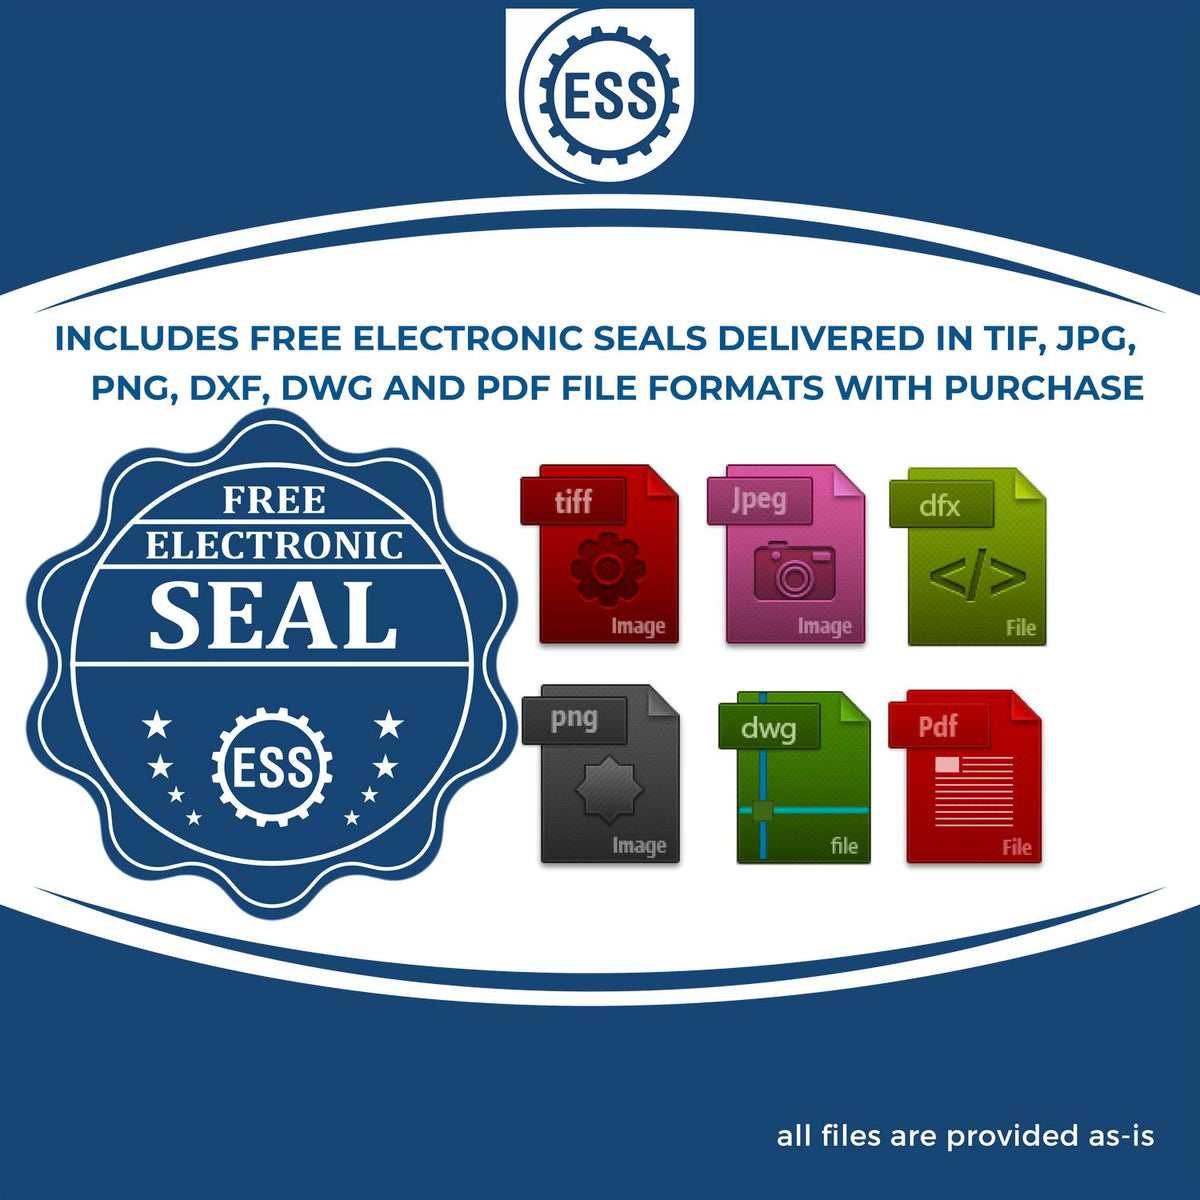 An infographic for the free electronic seal for the Slim Pre-Inked West Virginia Professional Geologist Seal Stamp illustrating the different file type icons such as DXF, DWG, TIF, JPG and PNG.